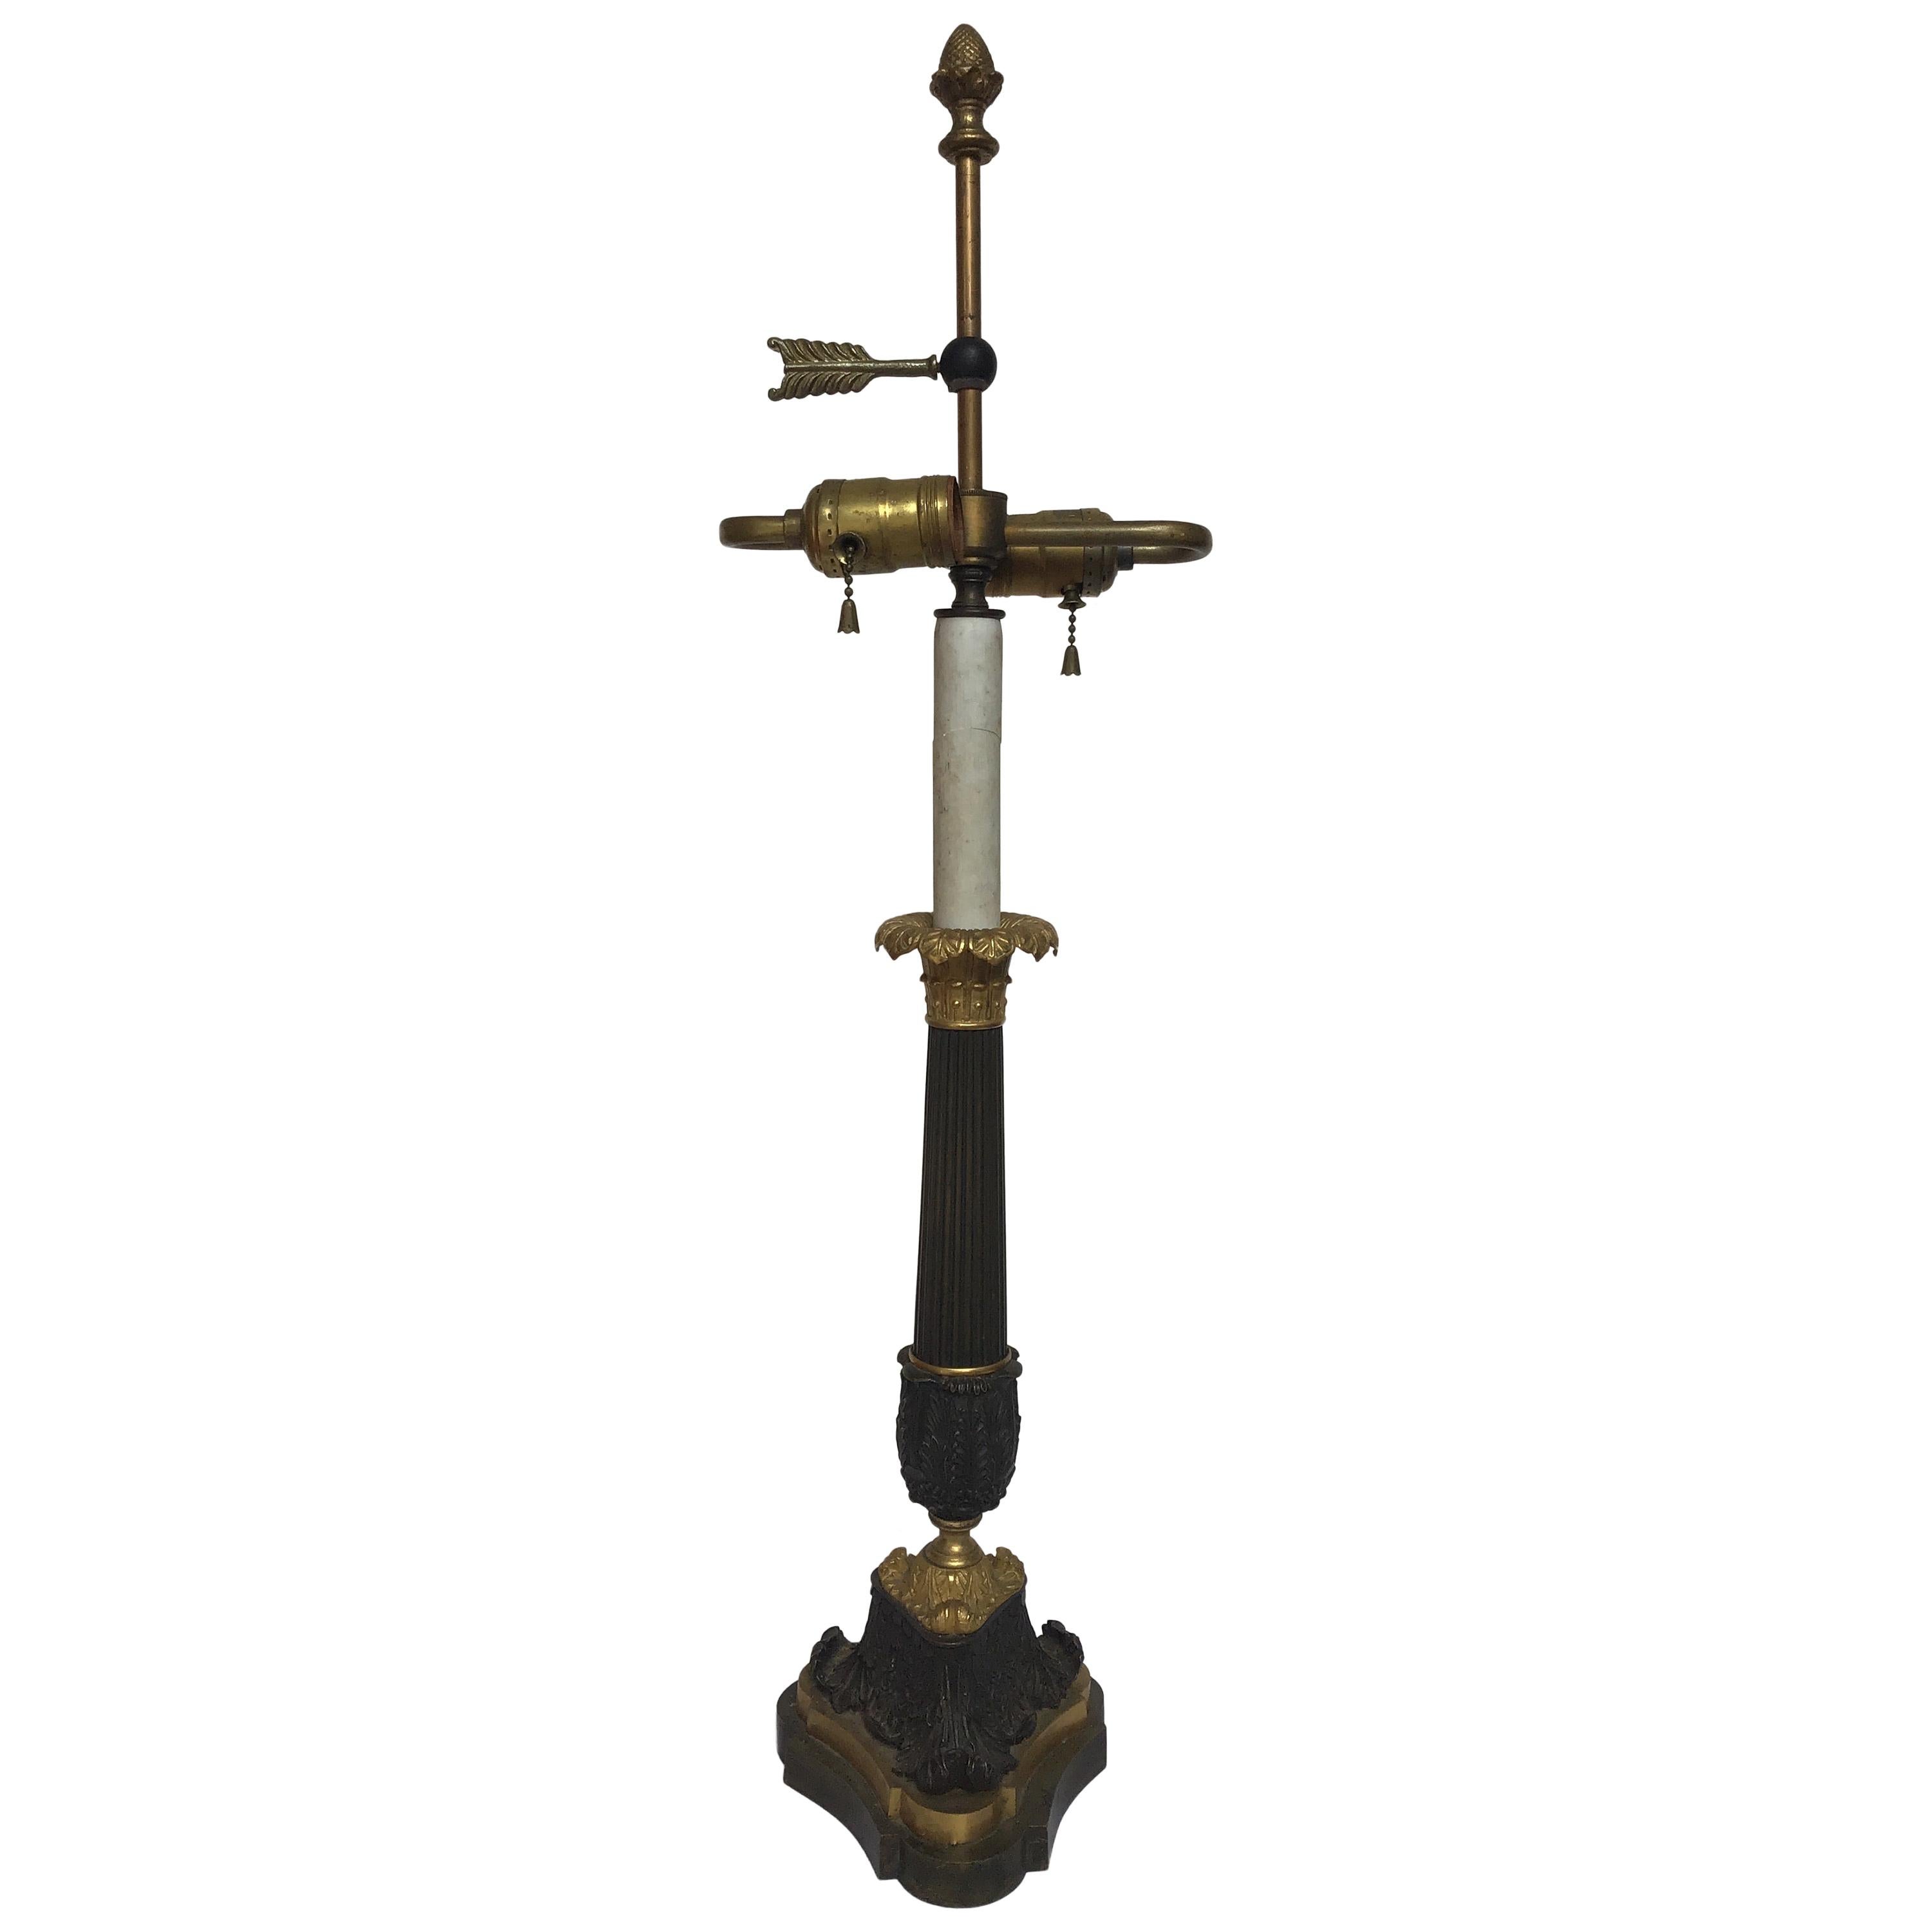 1880s French Empire Gilt Bronze Candlestick Lamp